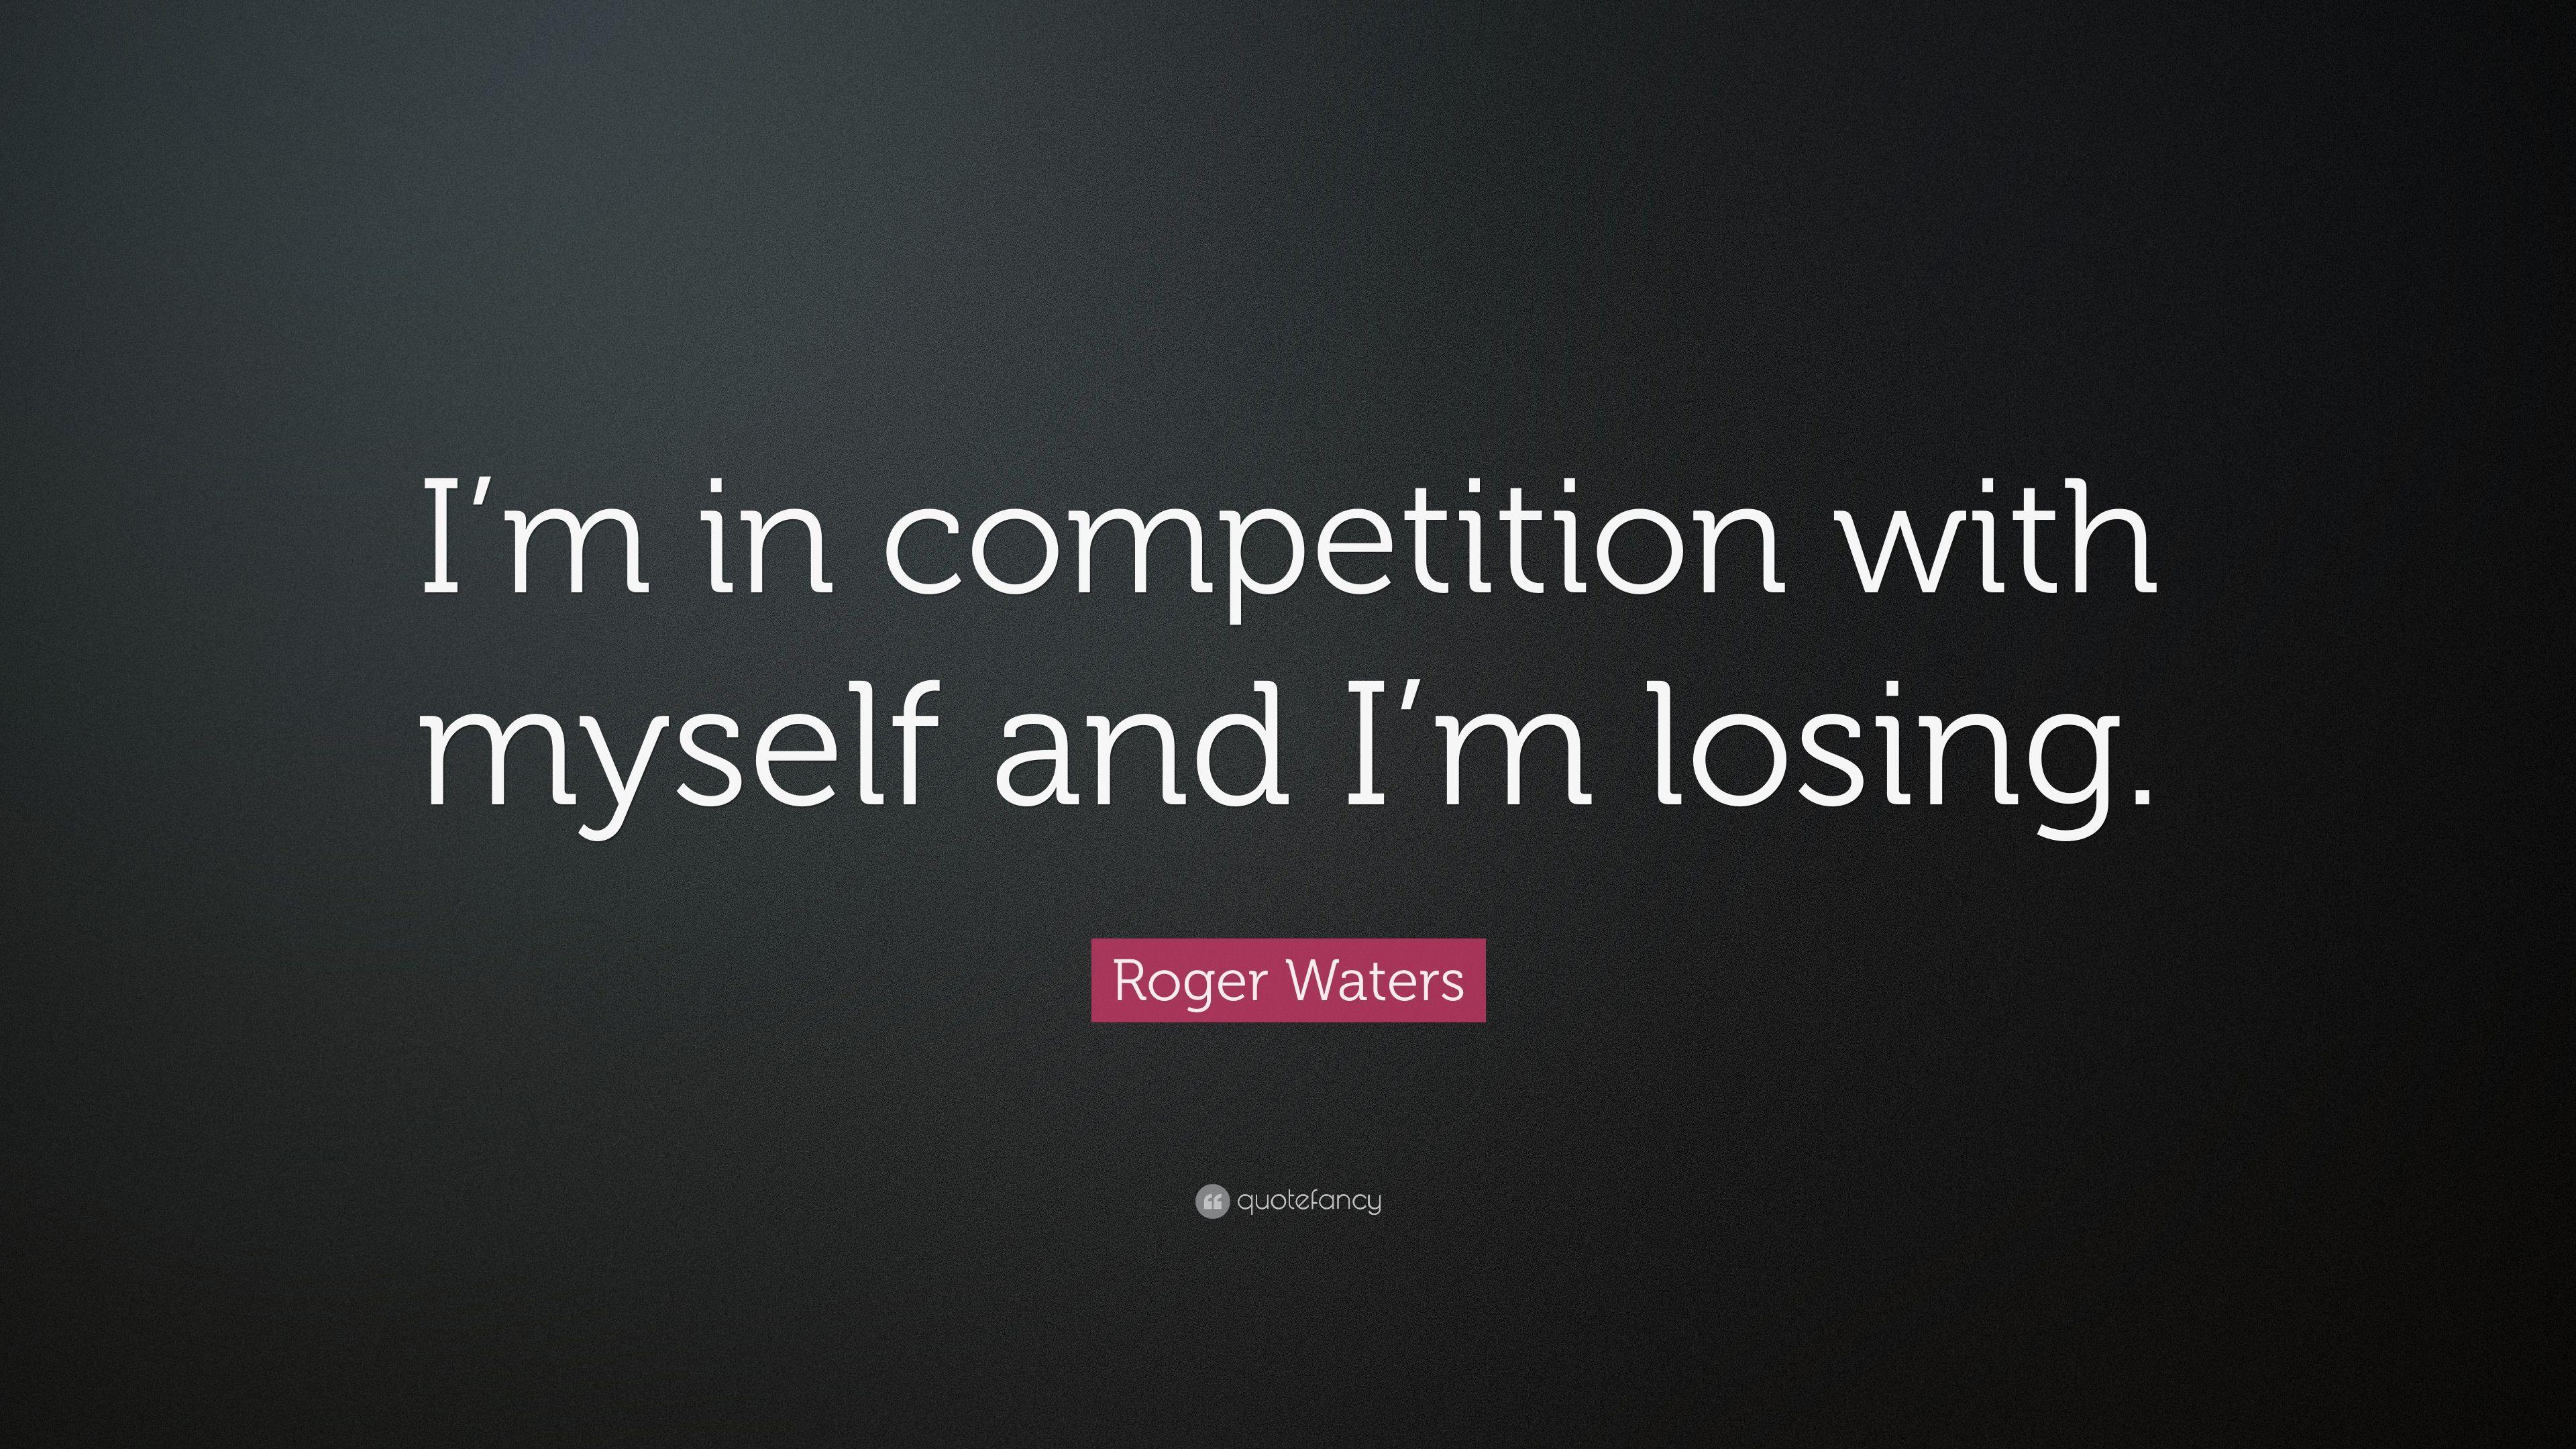 Roger Waters Quote: “I'm in competition with myself and I'm losing